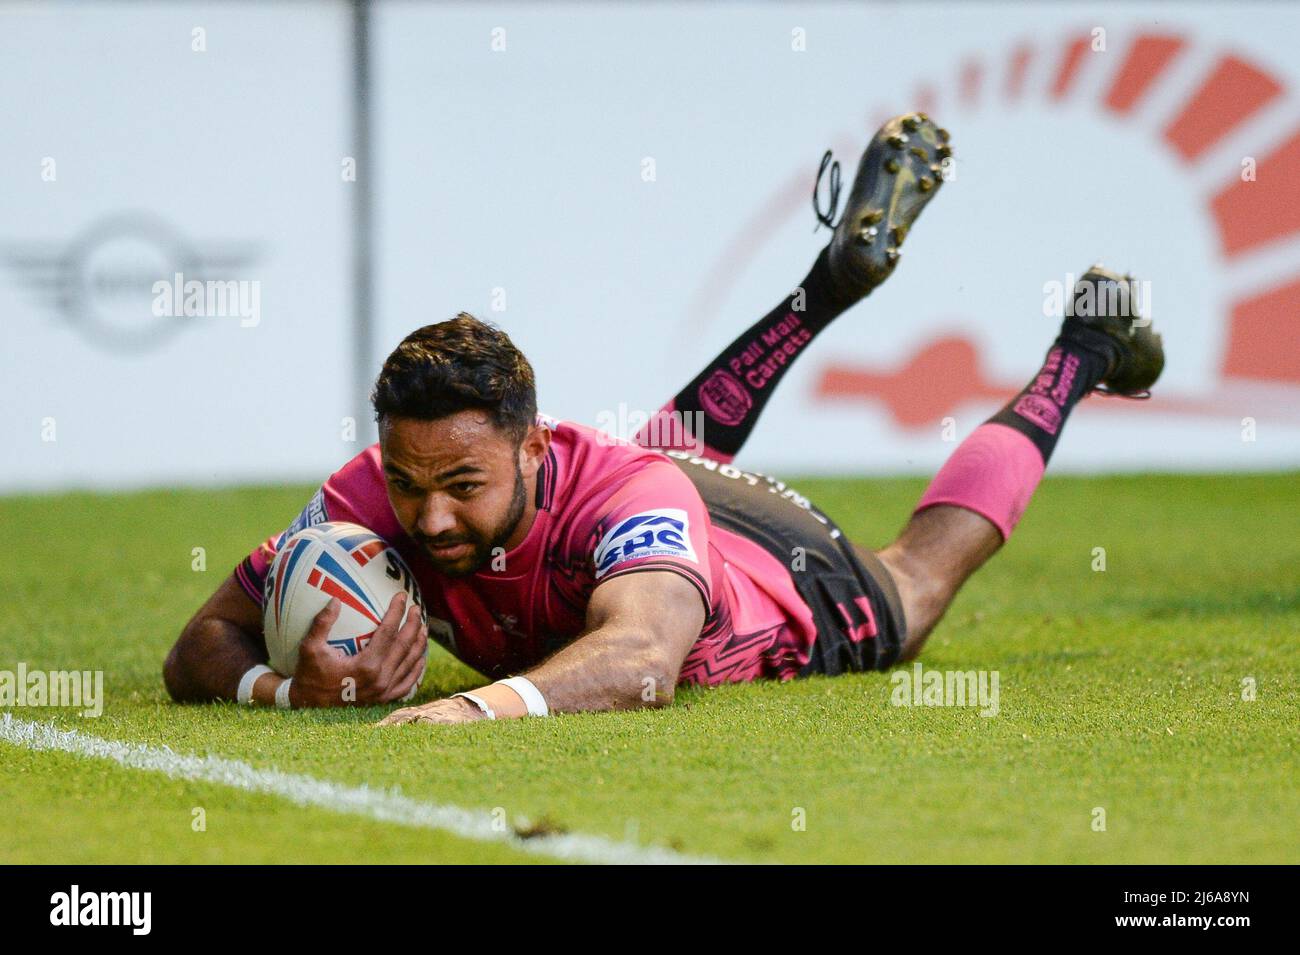 Warrington, UK. 29th Apr, 2022. Warrington, England -29th April 2022 - Bevan French of Wigan Warriors scores a try. Rugby League Betfred Super League Round 10 Warrington Wolves vs Wigan Warriors at Halliwell Jones Stadium, Warrington, UK  Dean Williams Credit: Dean Williams/Alamy Live News Stock Photo